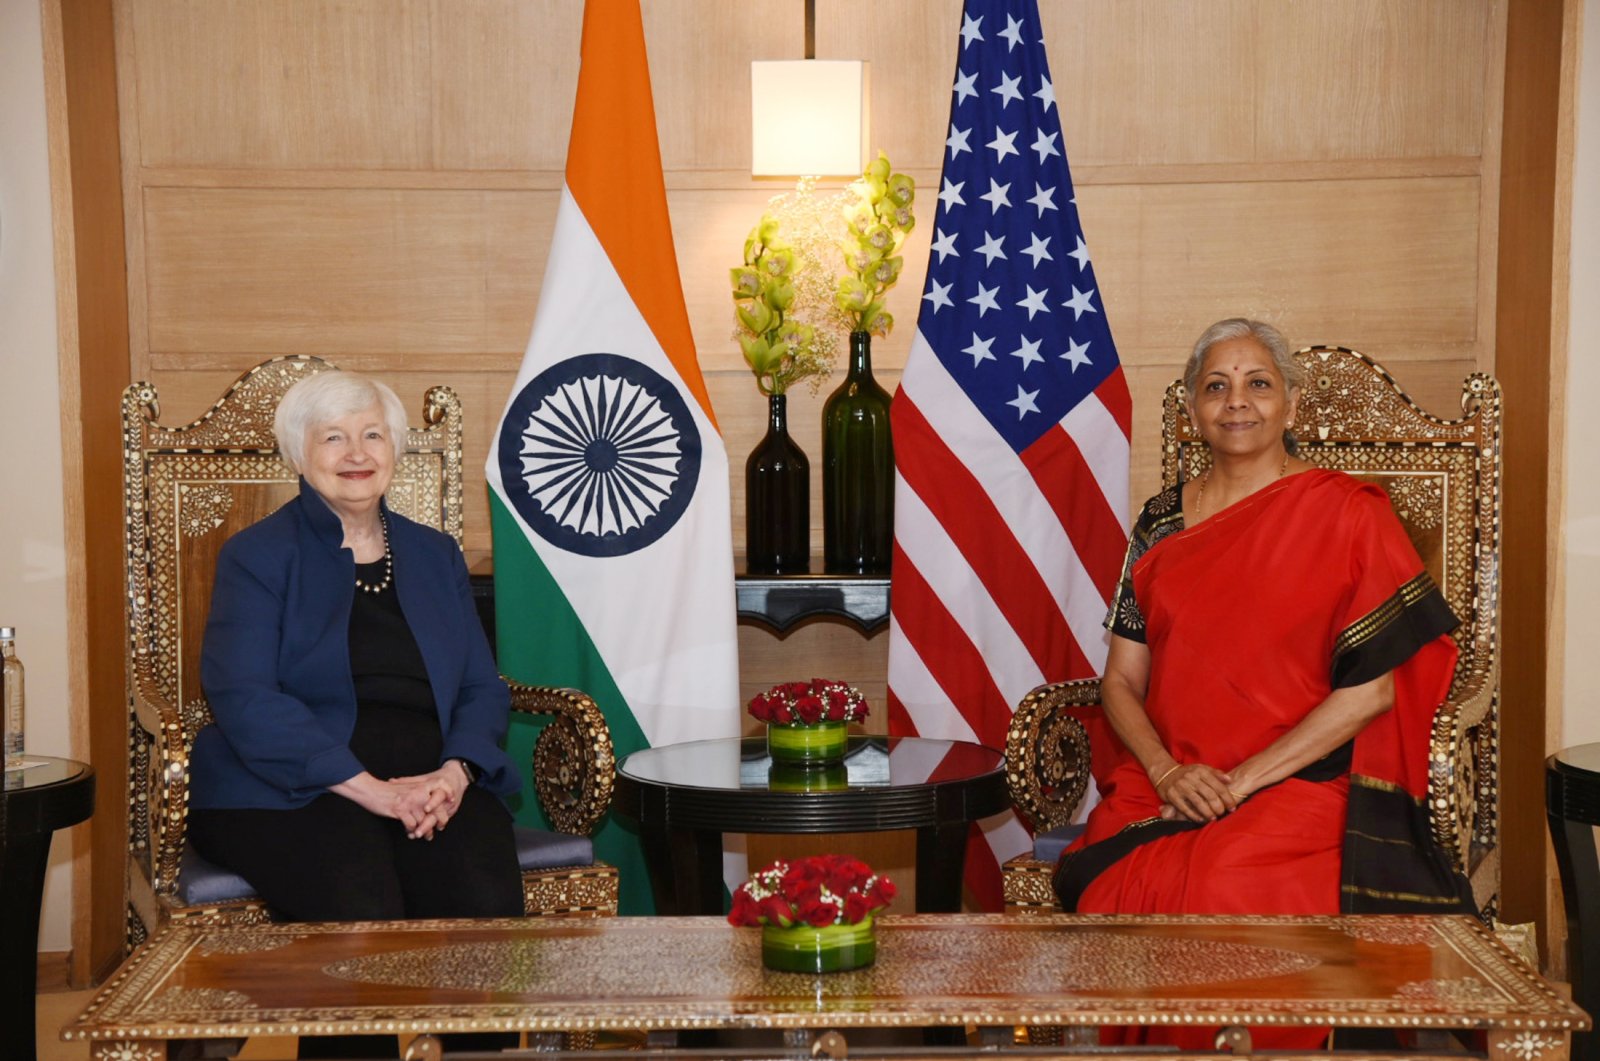 U.S. Treasury Secretary Janet Yellen (L) meets with Indian Finance Minister Nirmala Sitharaman (R) as part of her visit to New Delhi, India, Nov. 12, 2022. (AA Photo)